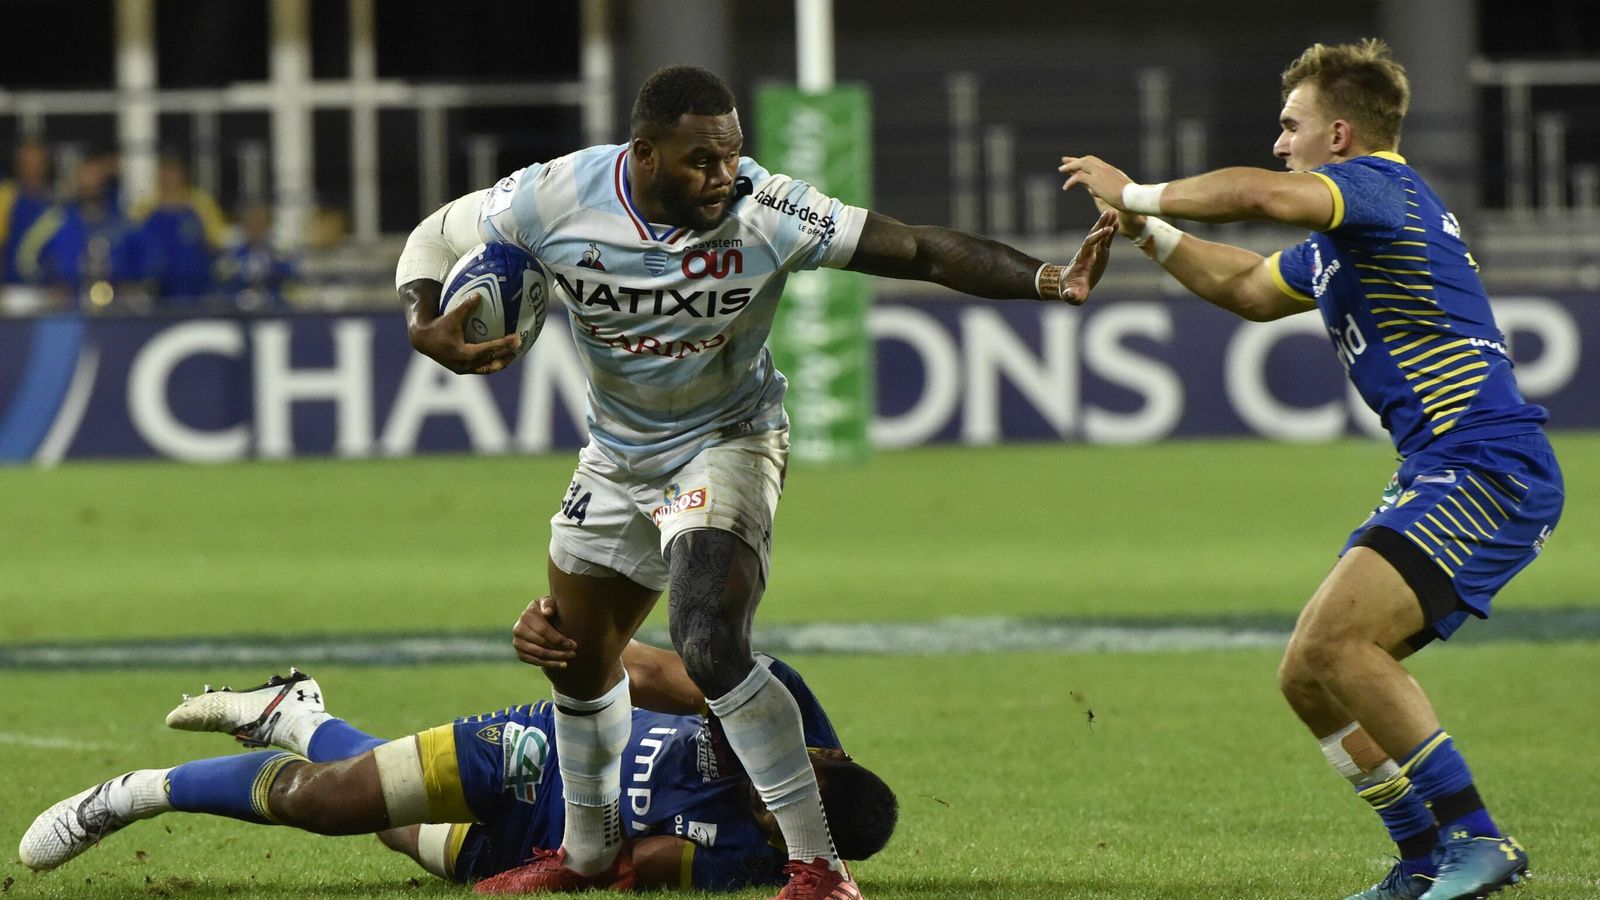 Clermont 27 - 36 Racing - Match Report & Highlights